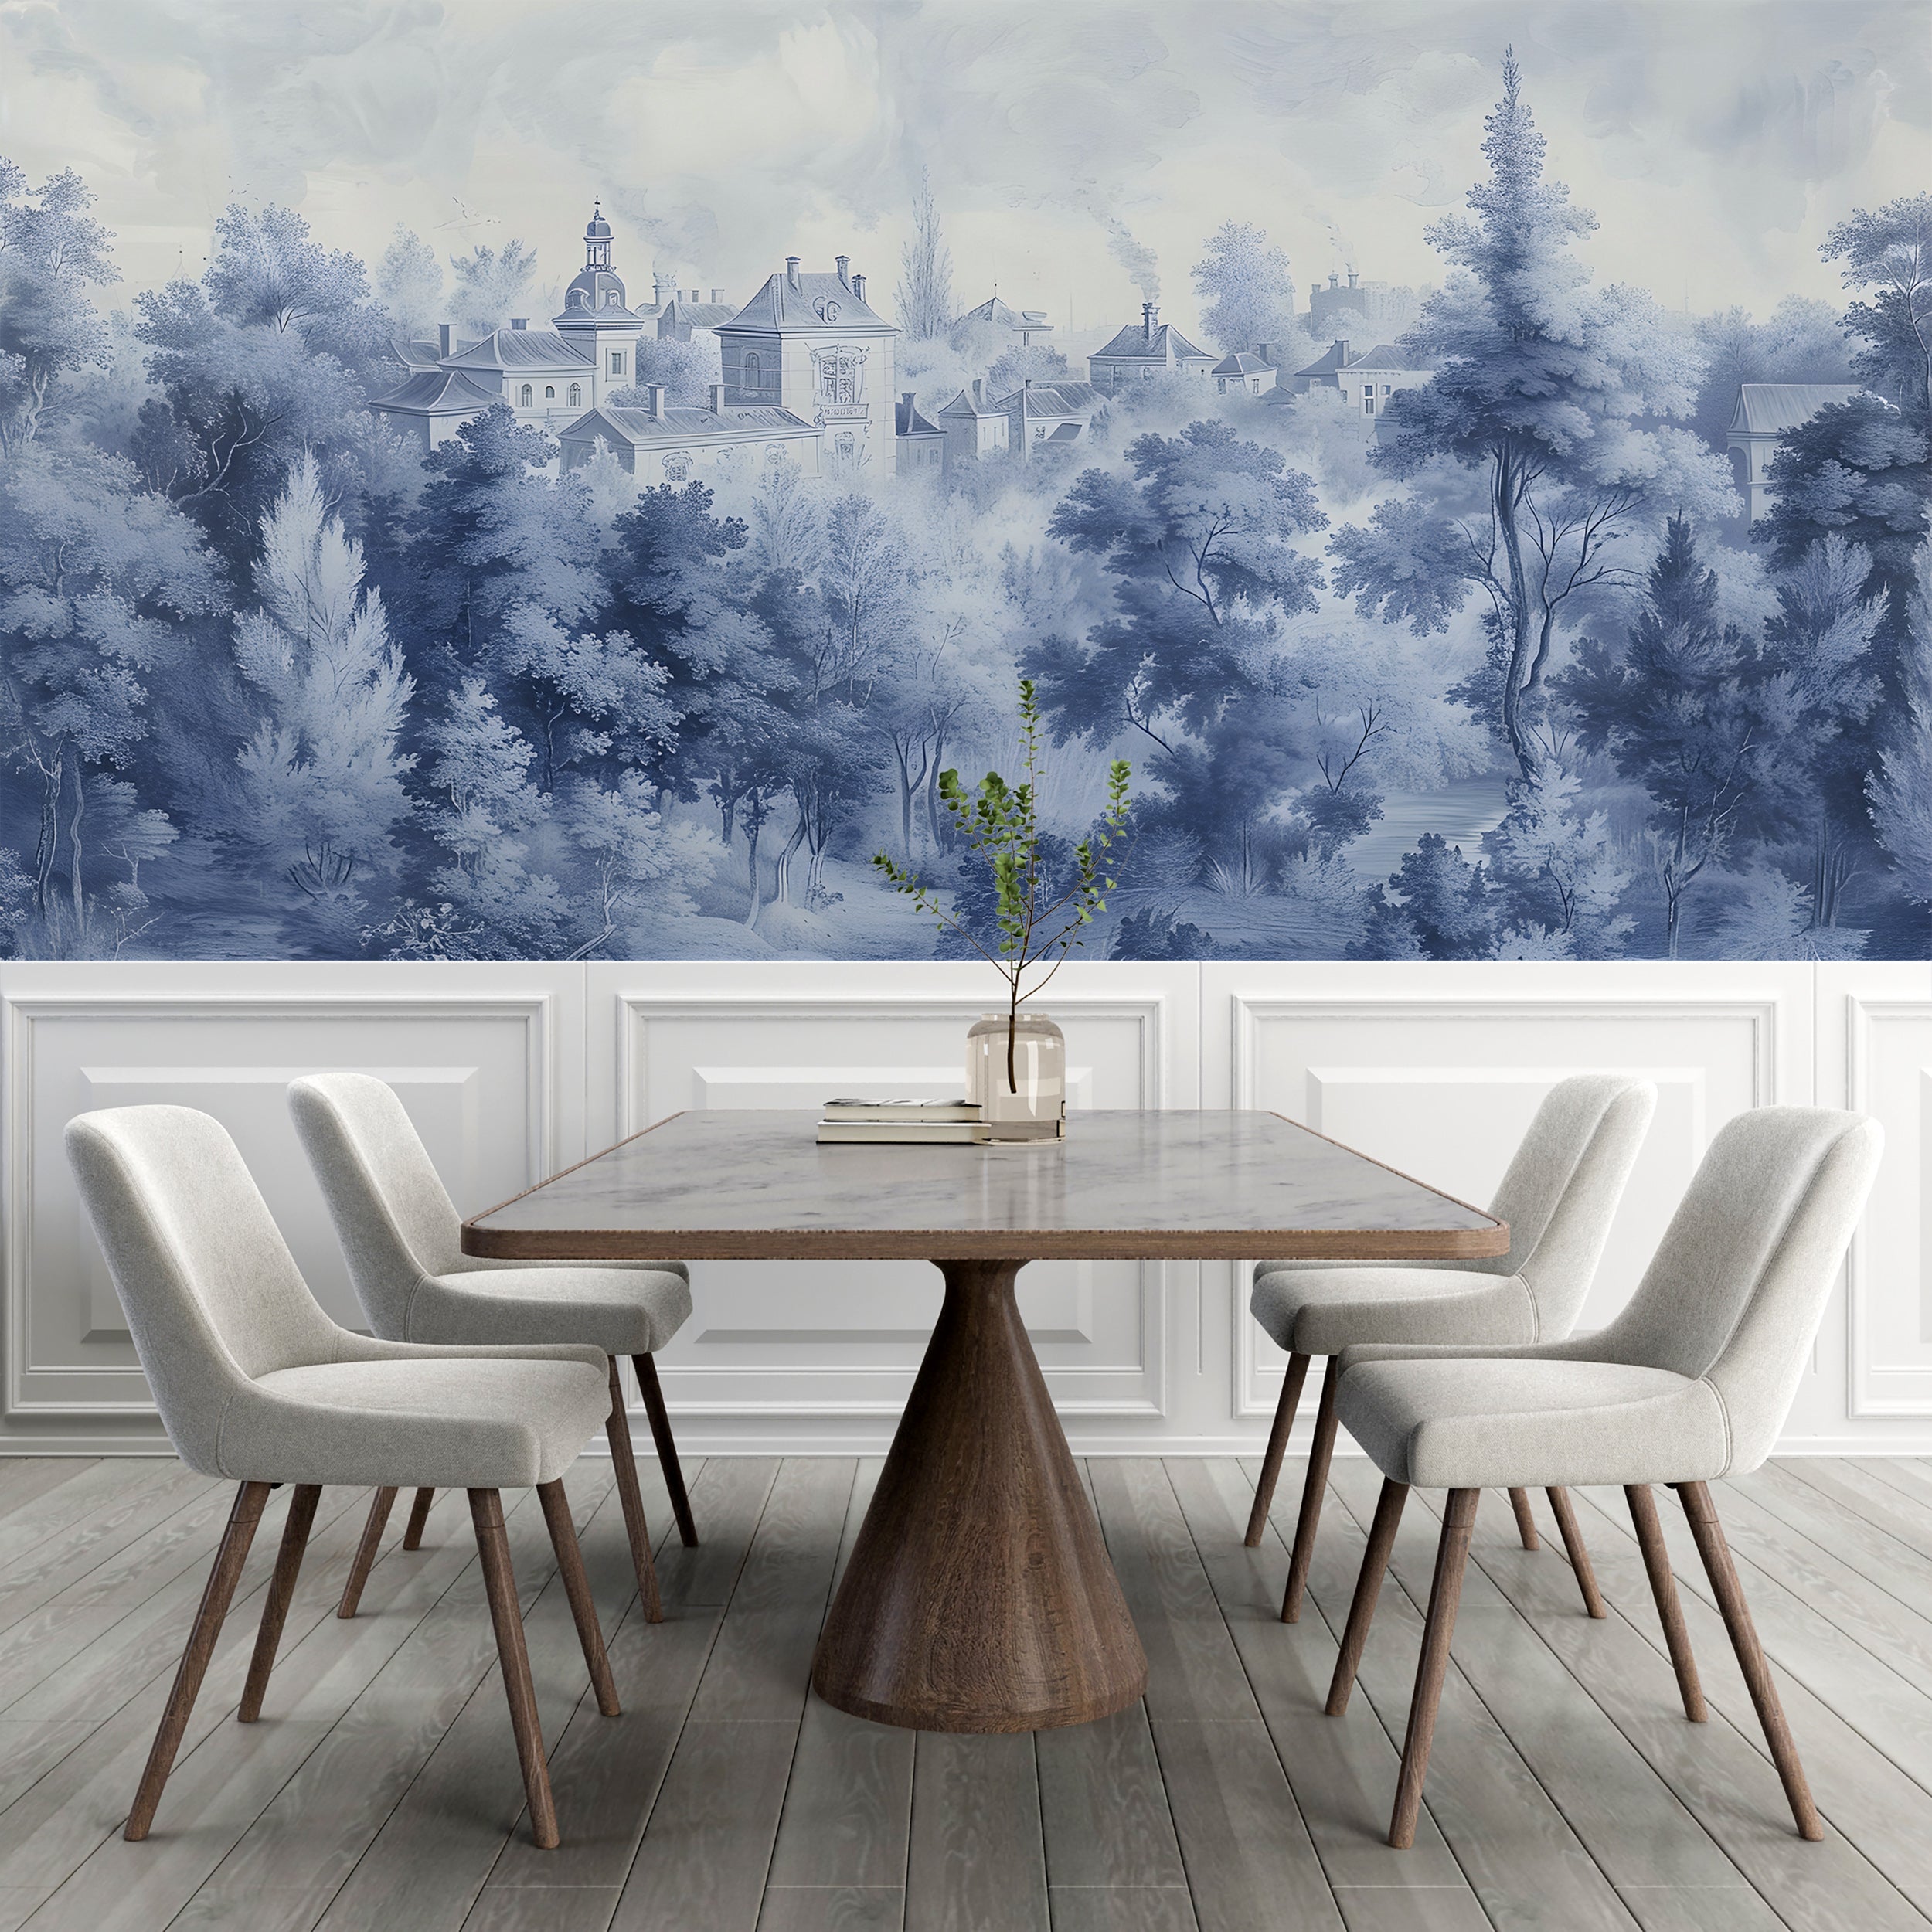 Vintage Blue Toile de Jouy Style Wall Mural French Countryside Peel and Stick Wallpaper